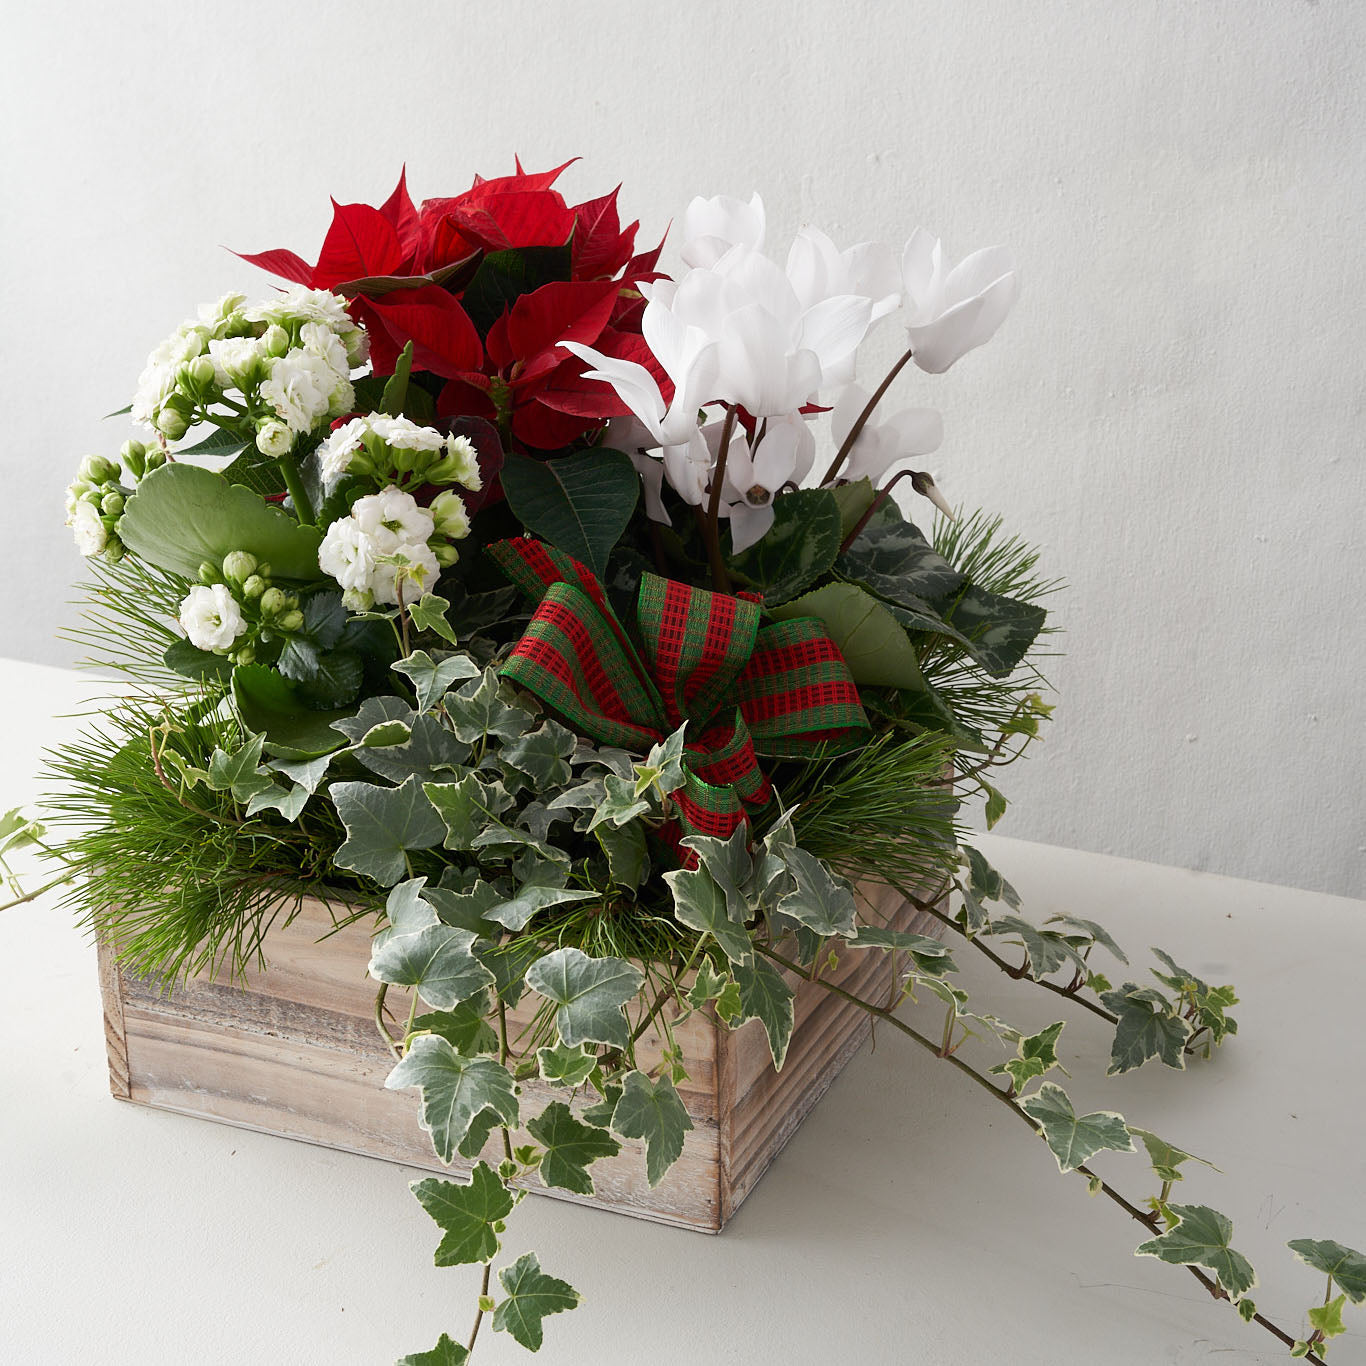 Red and white Christmas plants with pine and ribbon in a wooden box. 